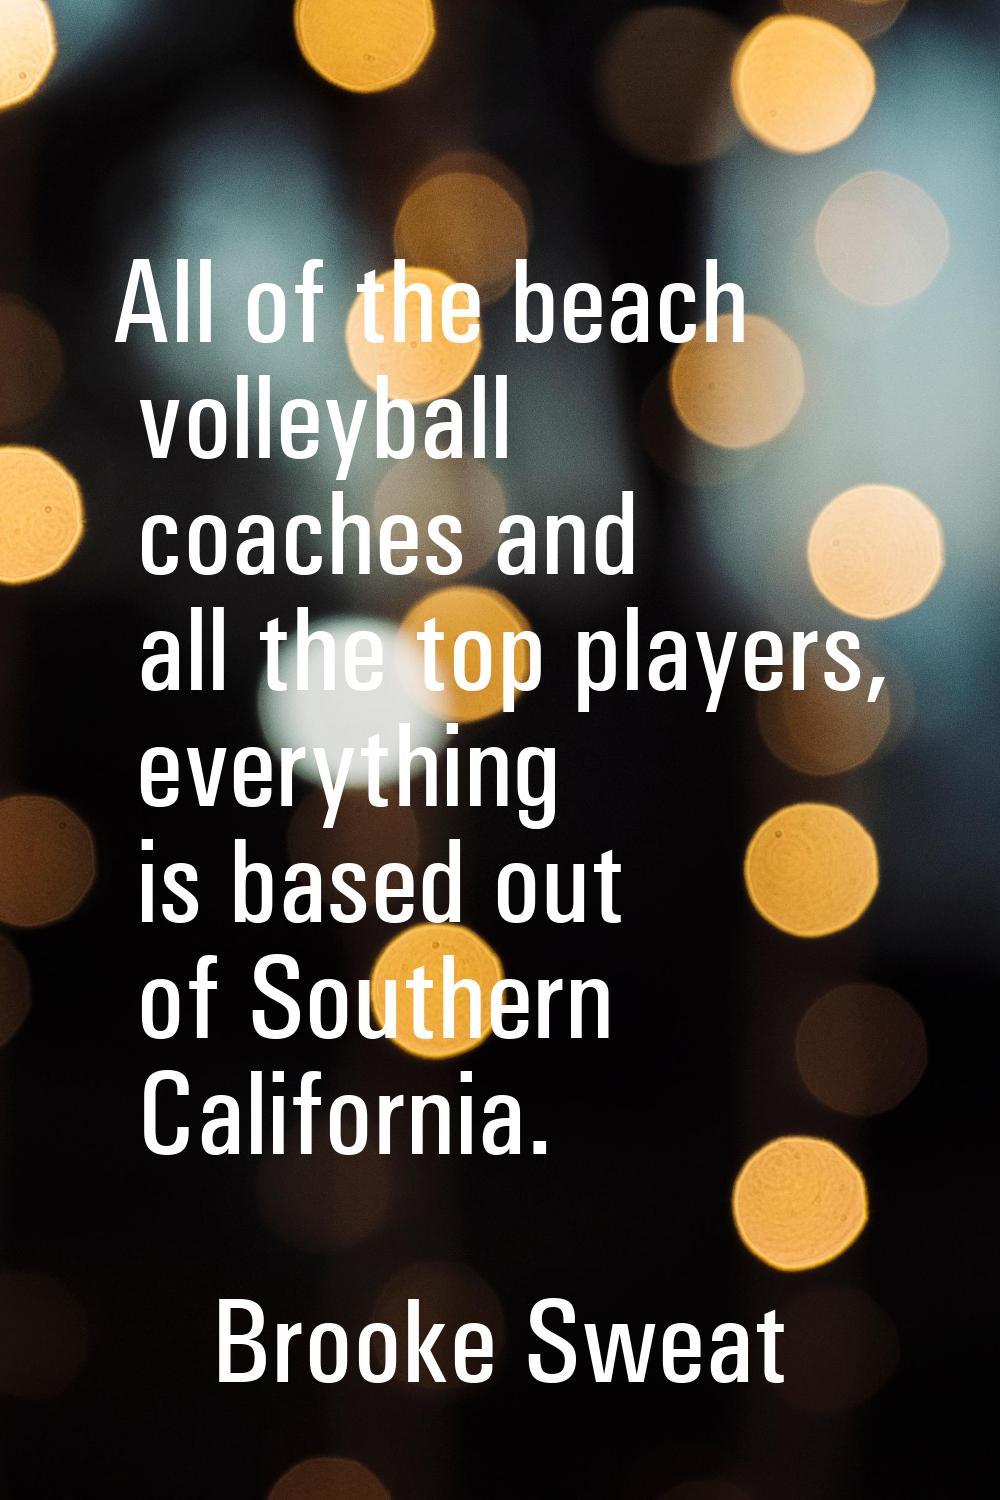 All of the beach volleyball coaches and all the top players, everything is based out of Southern Ca